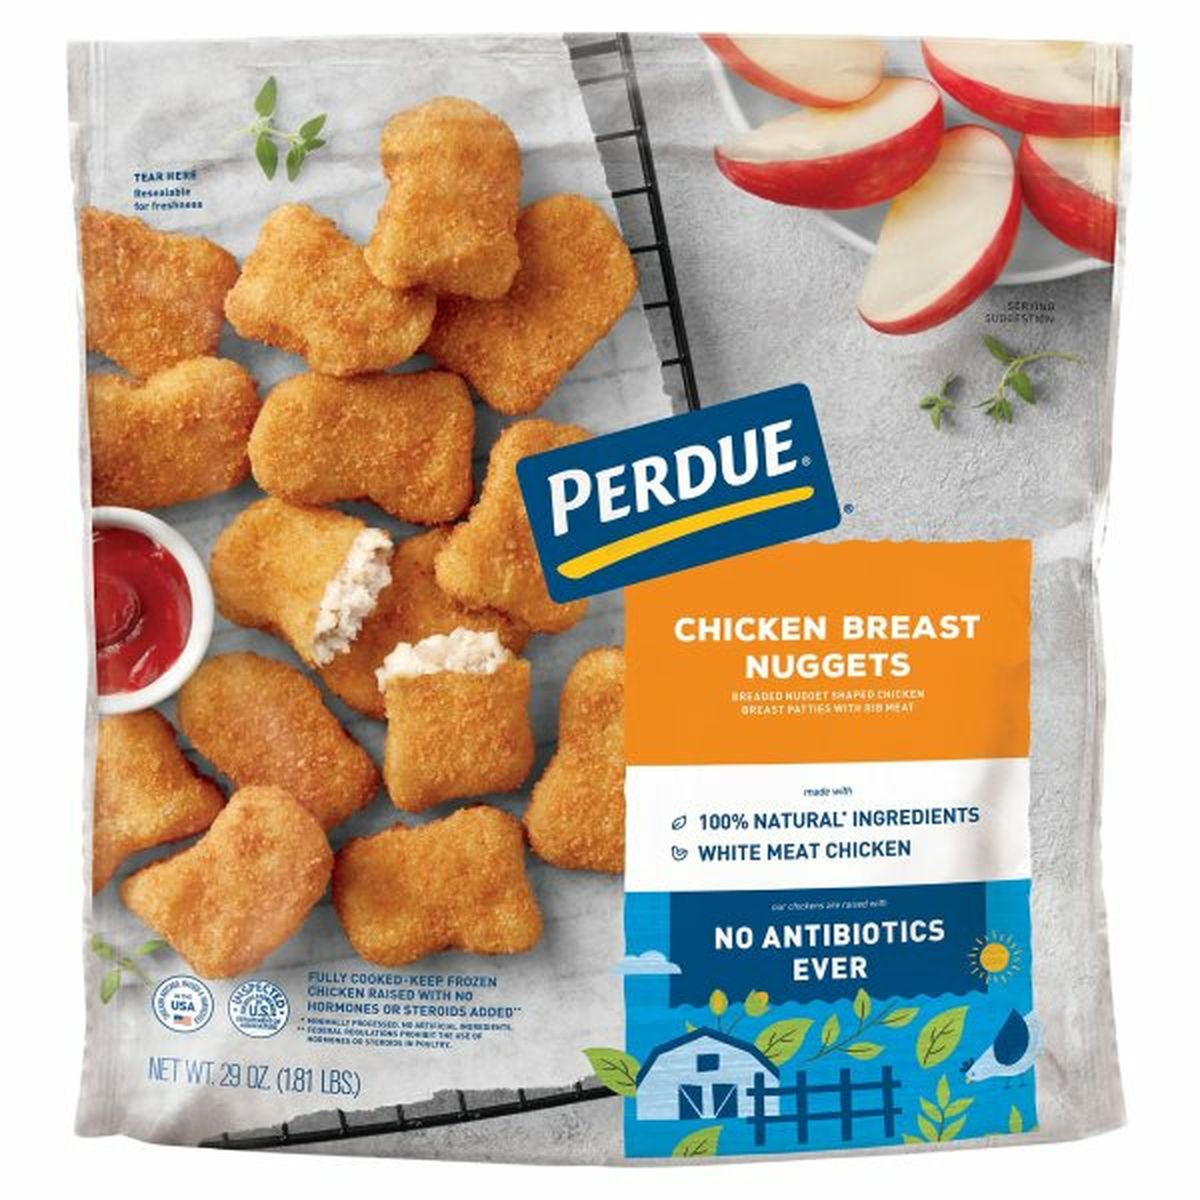 Calories in Perdue Chicken Breast Nuggets